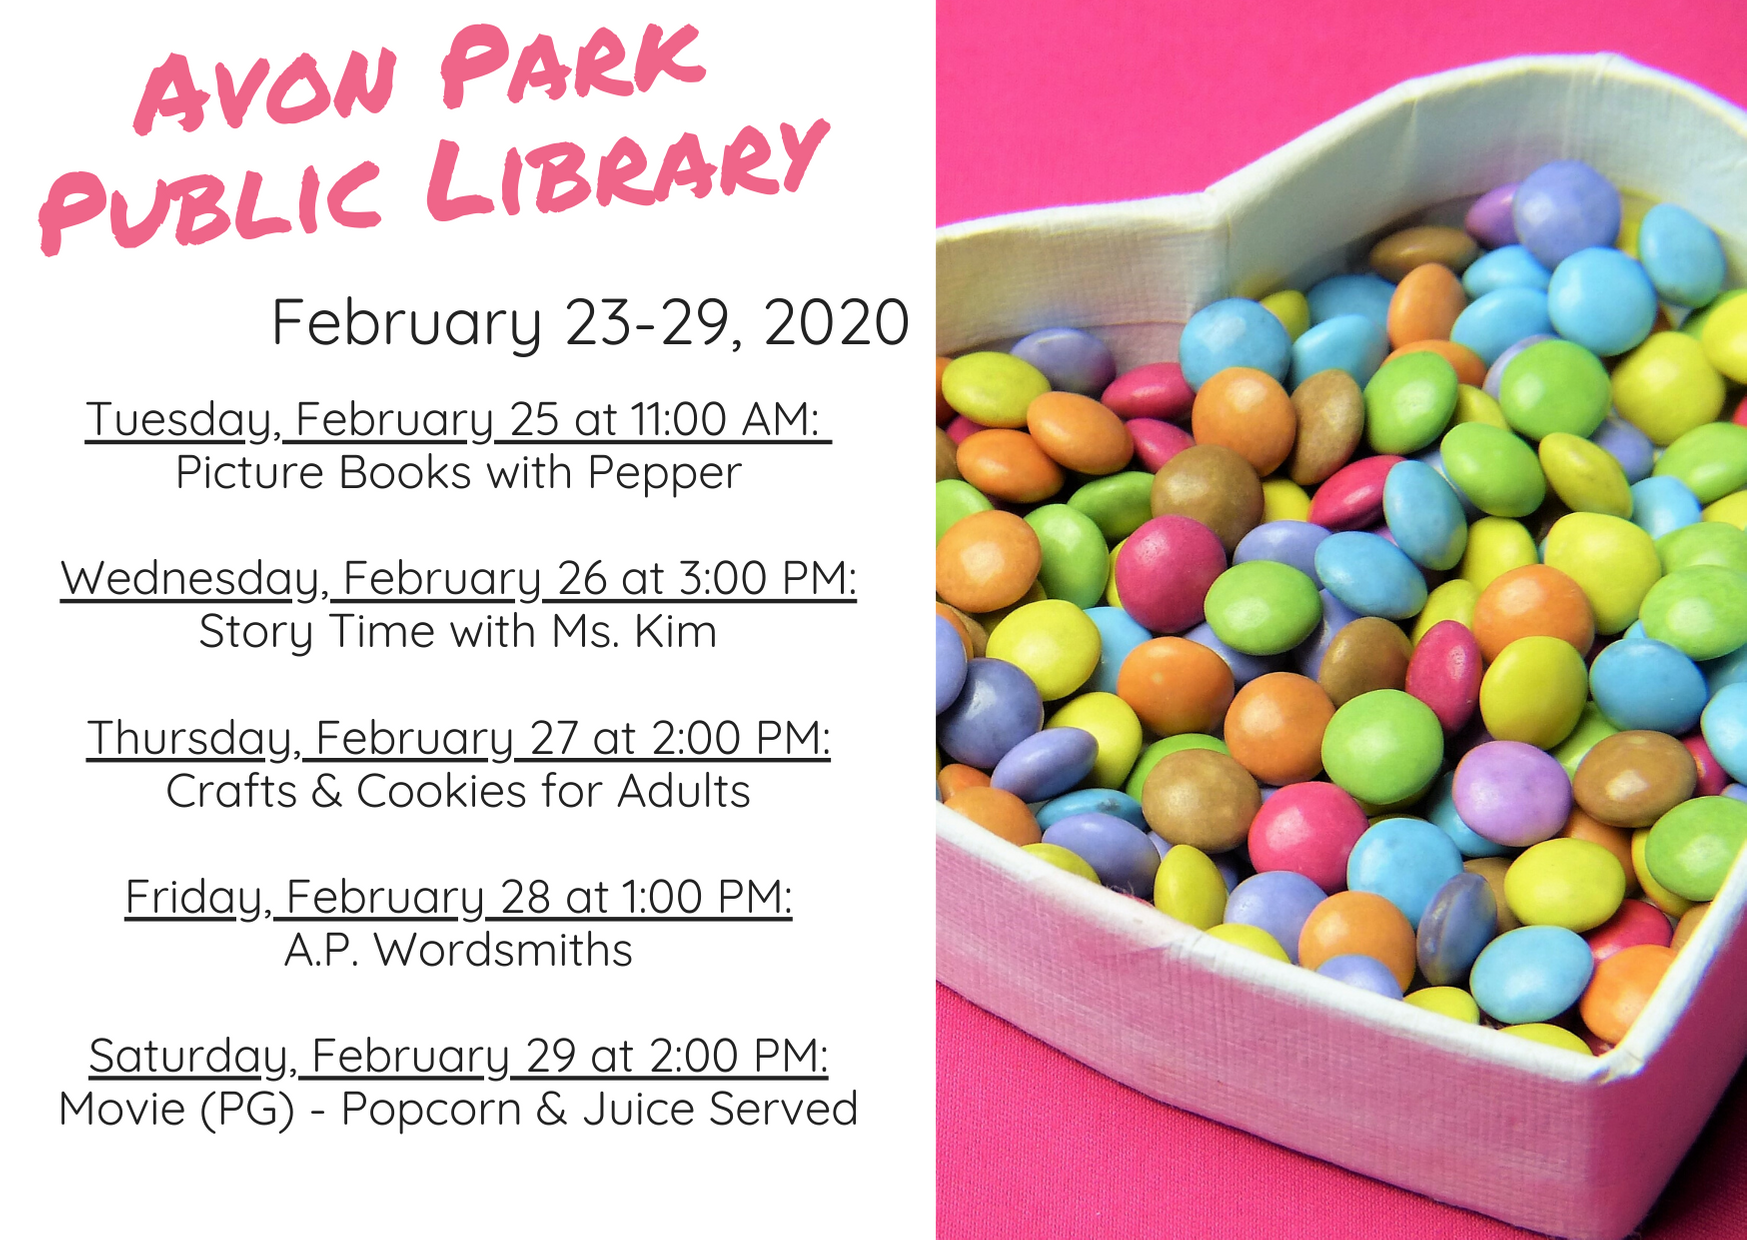 The events for the Avon Park Public Library are as follows: On Tuesday, February 25, 2020 at 11:00 AM, Pepper, the therapy dog, will be joining us for Picture Books with Pepper in the atrium. At 3:00 PM on Wednesday, February 26, 2020, Ms. Kim will host story time in the children's area. On Thursday, February 27, 2020, we will have crafts and cookies for adults happening in the meeting room 2:00 PM to 4:00 PM. On Friday, January 28, 2020 at 1:00 PM, the A.P Wordsmiths will be meeting. On Saturday, February 29, 2020 at 2:00 PM, we will be showing a movie (rated PG) with popcorn and juice served.